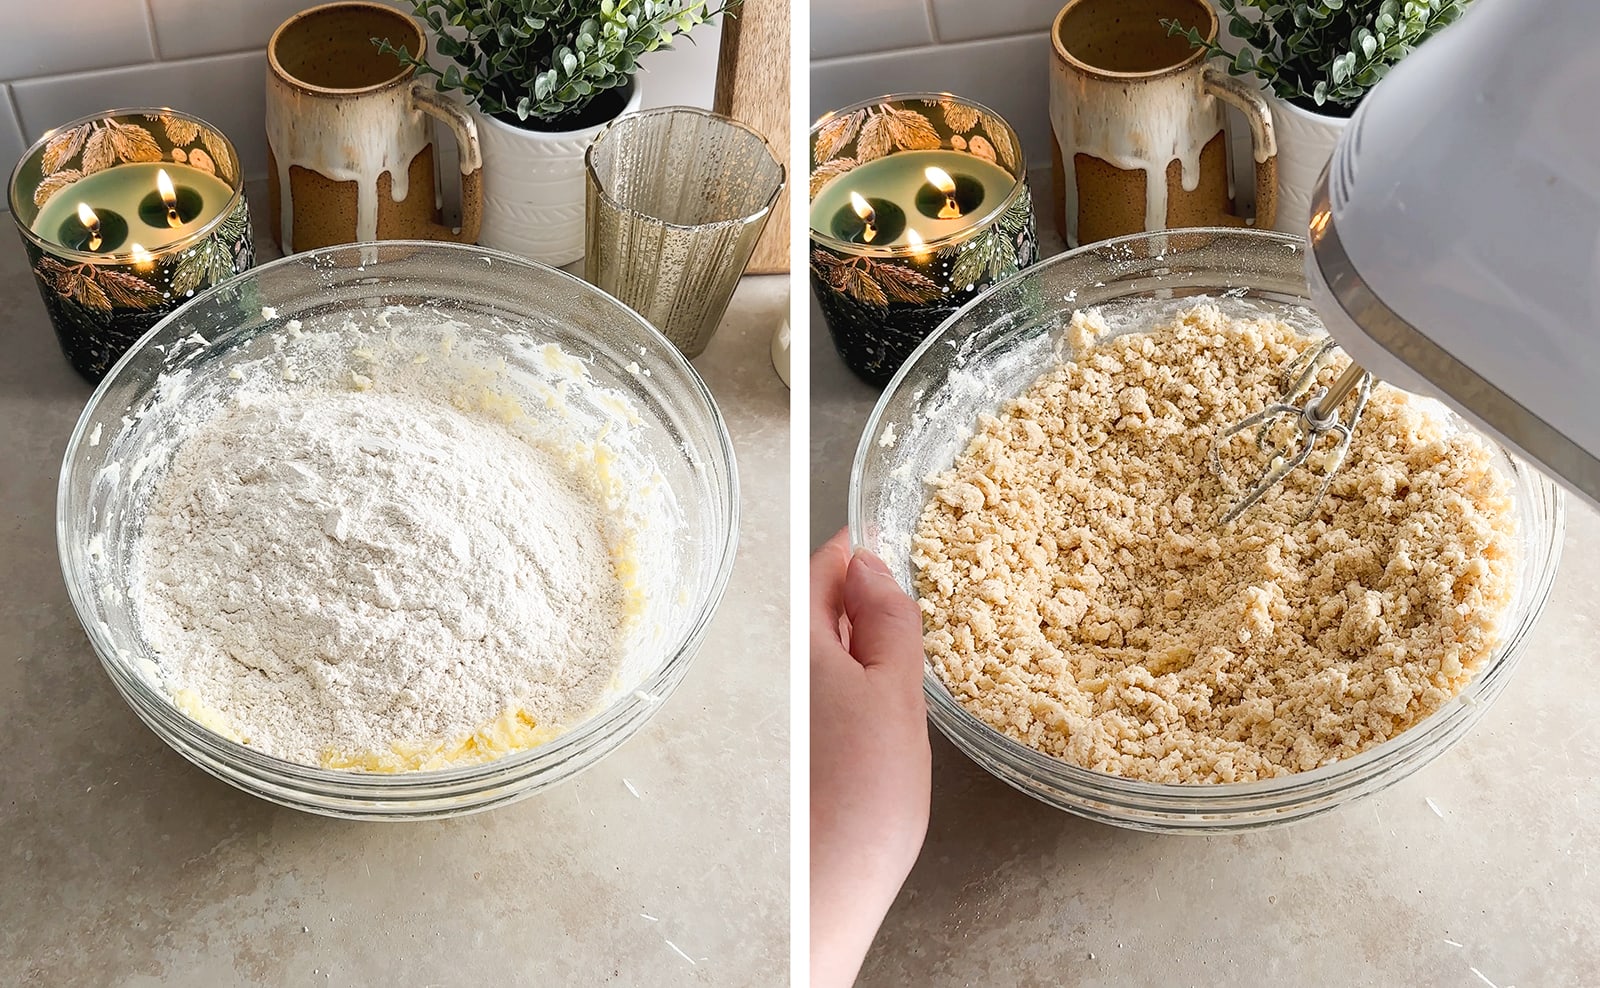 Left to right: flour in a mixing bowl, mixing a crumbly dough with a hand mixer.